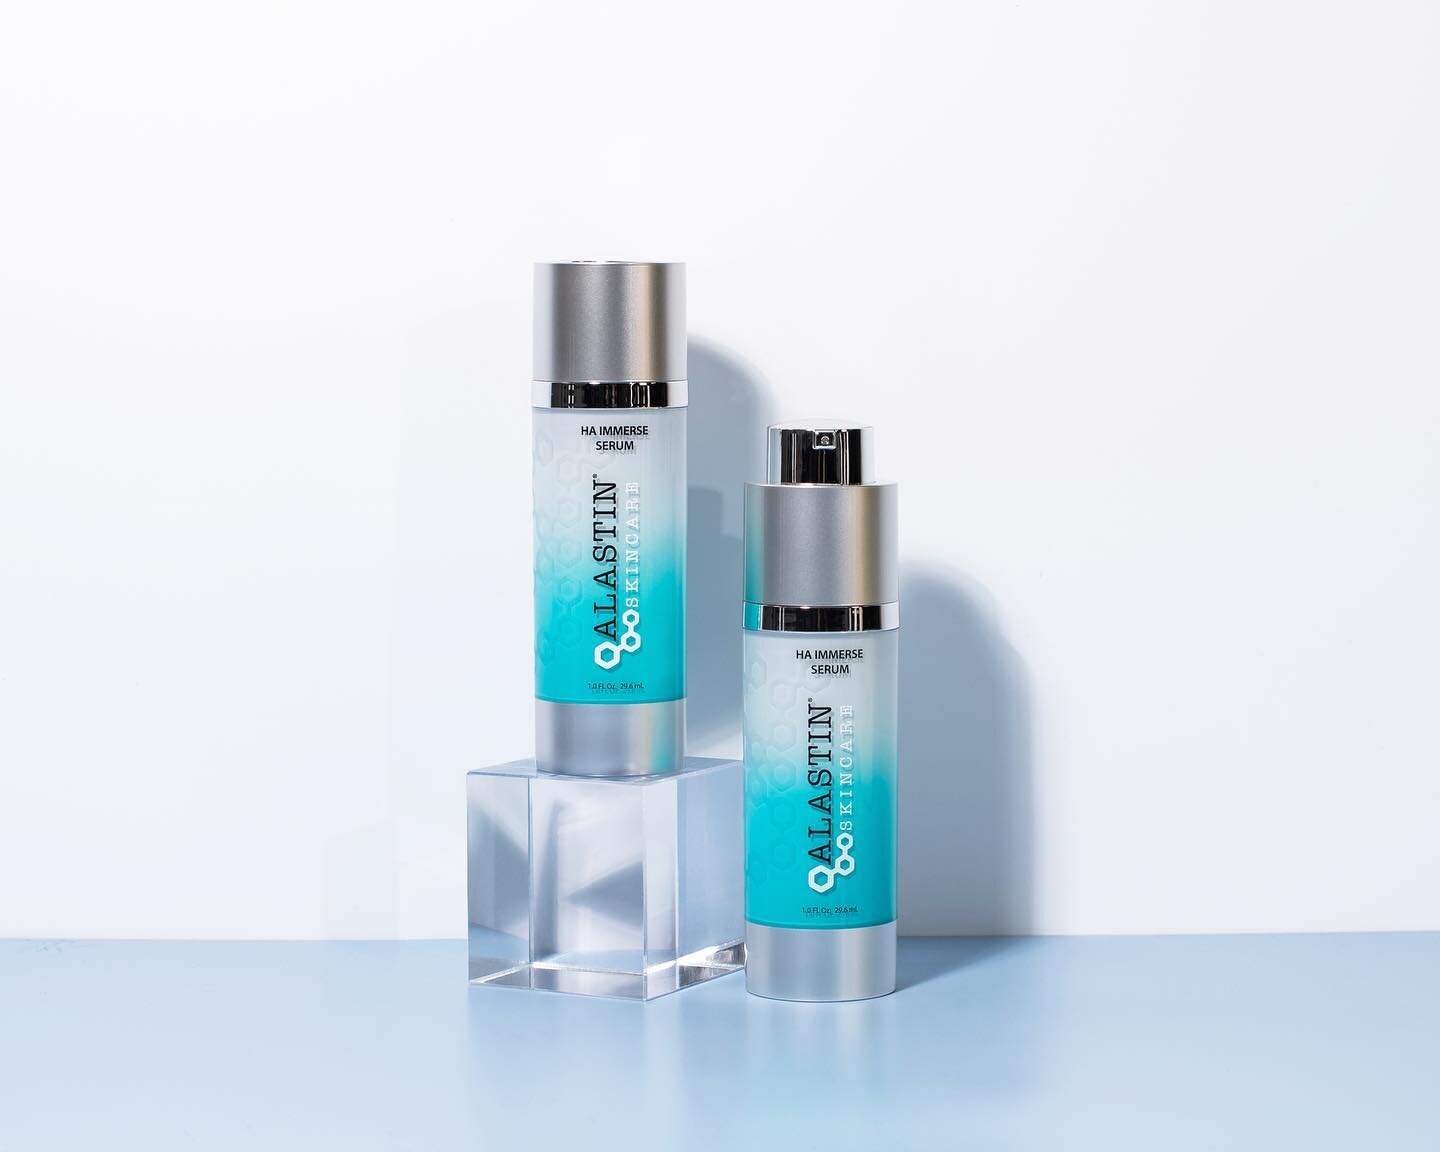 Immerse yourself in Alastin&rsquo;s HA Immerse Serum! 

Hydrate
Stimulate 
Radiate 

* Helps instantly boost skin hydration and locks in moisture. 
* Proprietary Octapeptide-45 helps the skin&rsquo;s ability to naturally increase its own high-molecul